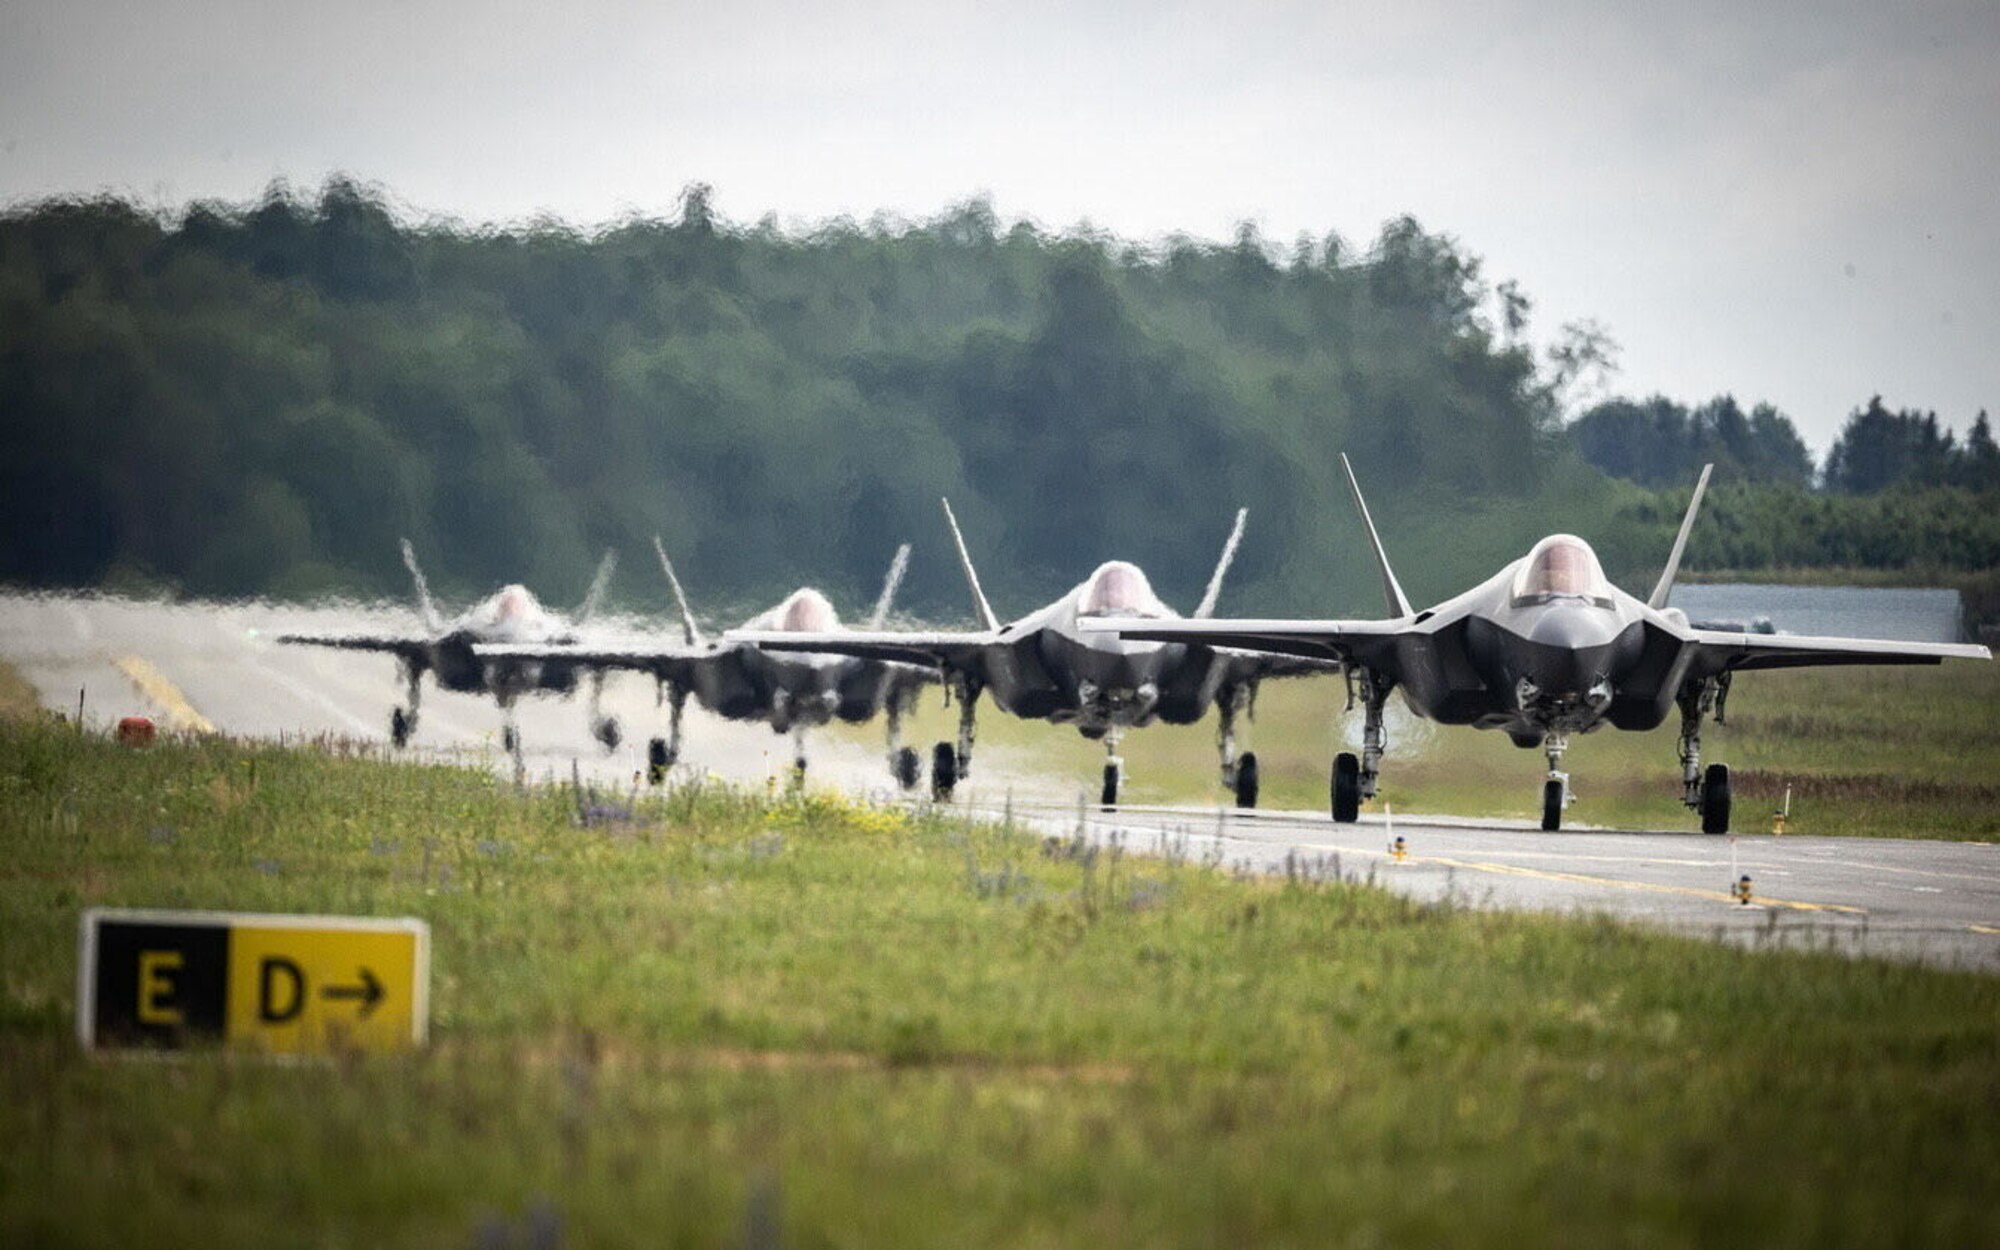 Four U.S. Air Force F-35A Lightning II aircraft assigned to the Vermont Air National Guard’s 158th Fighter Wing depart Spangdahlem Air Base, Germany, to support the NATO Air Shielding mission alongside French, British, Estonian, and Belgium allies at Amari Air Base, Estonia, July 6, 2022. Exercises and deployments that utilize ACE concepts ensure U.S. Air Forces in Europe are ready to protect and defend partners, allies, and U.S. interests at a moment’s notice and generate lethal combat power should deterrence fail. (U.S. Air Force courtesy photo)